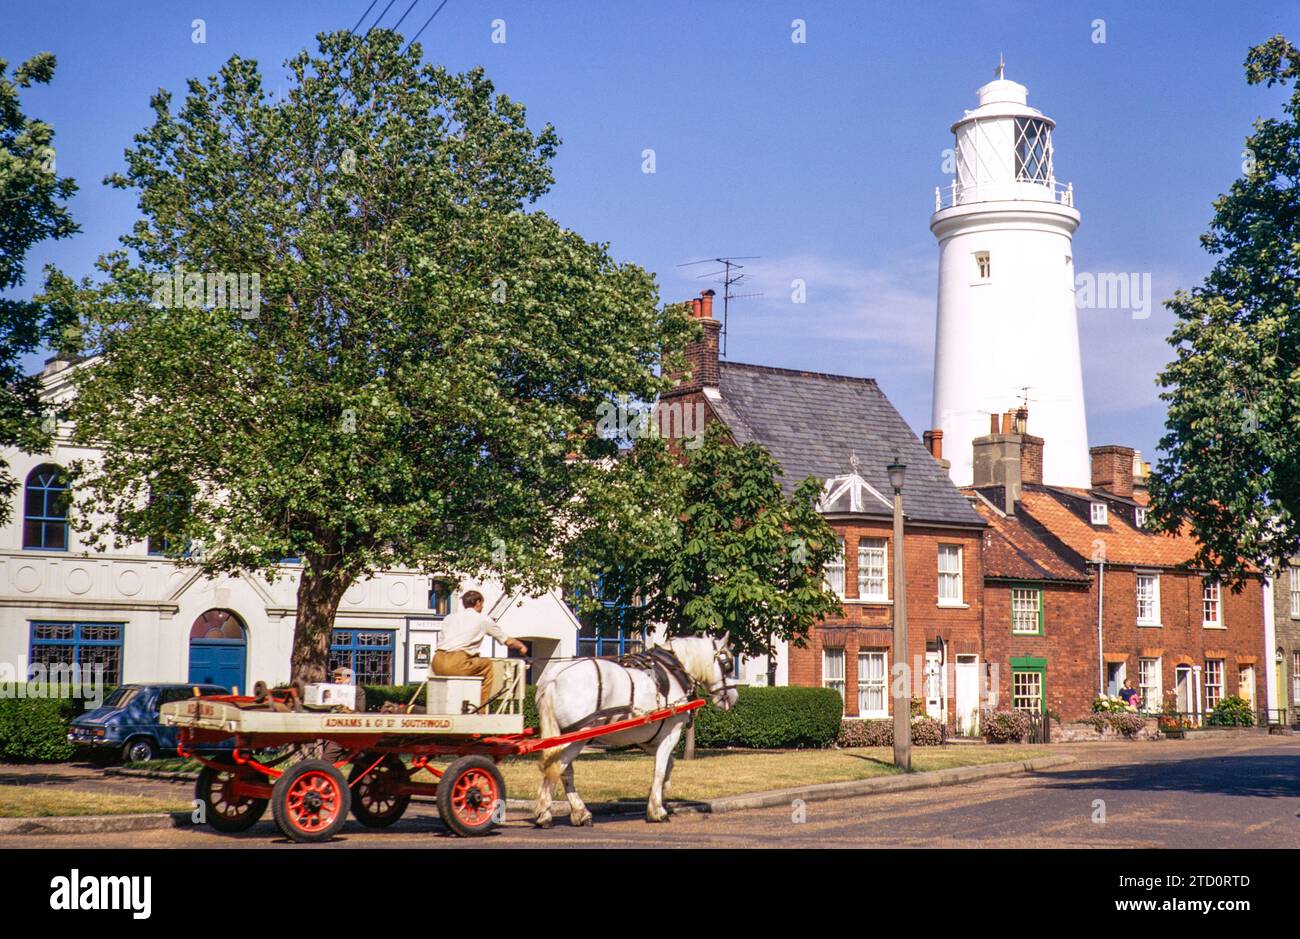 Adams brewery dray and lighthouse in town centre, Southwold, Suffolk, England, UK July 1971 Stock Photo